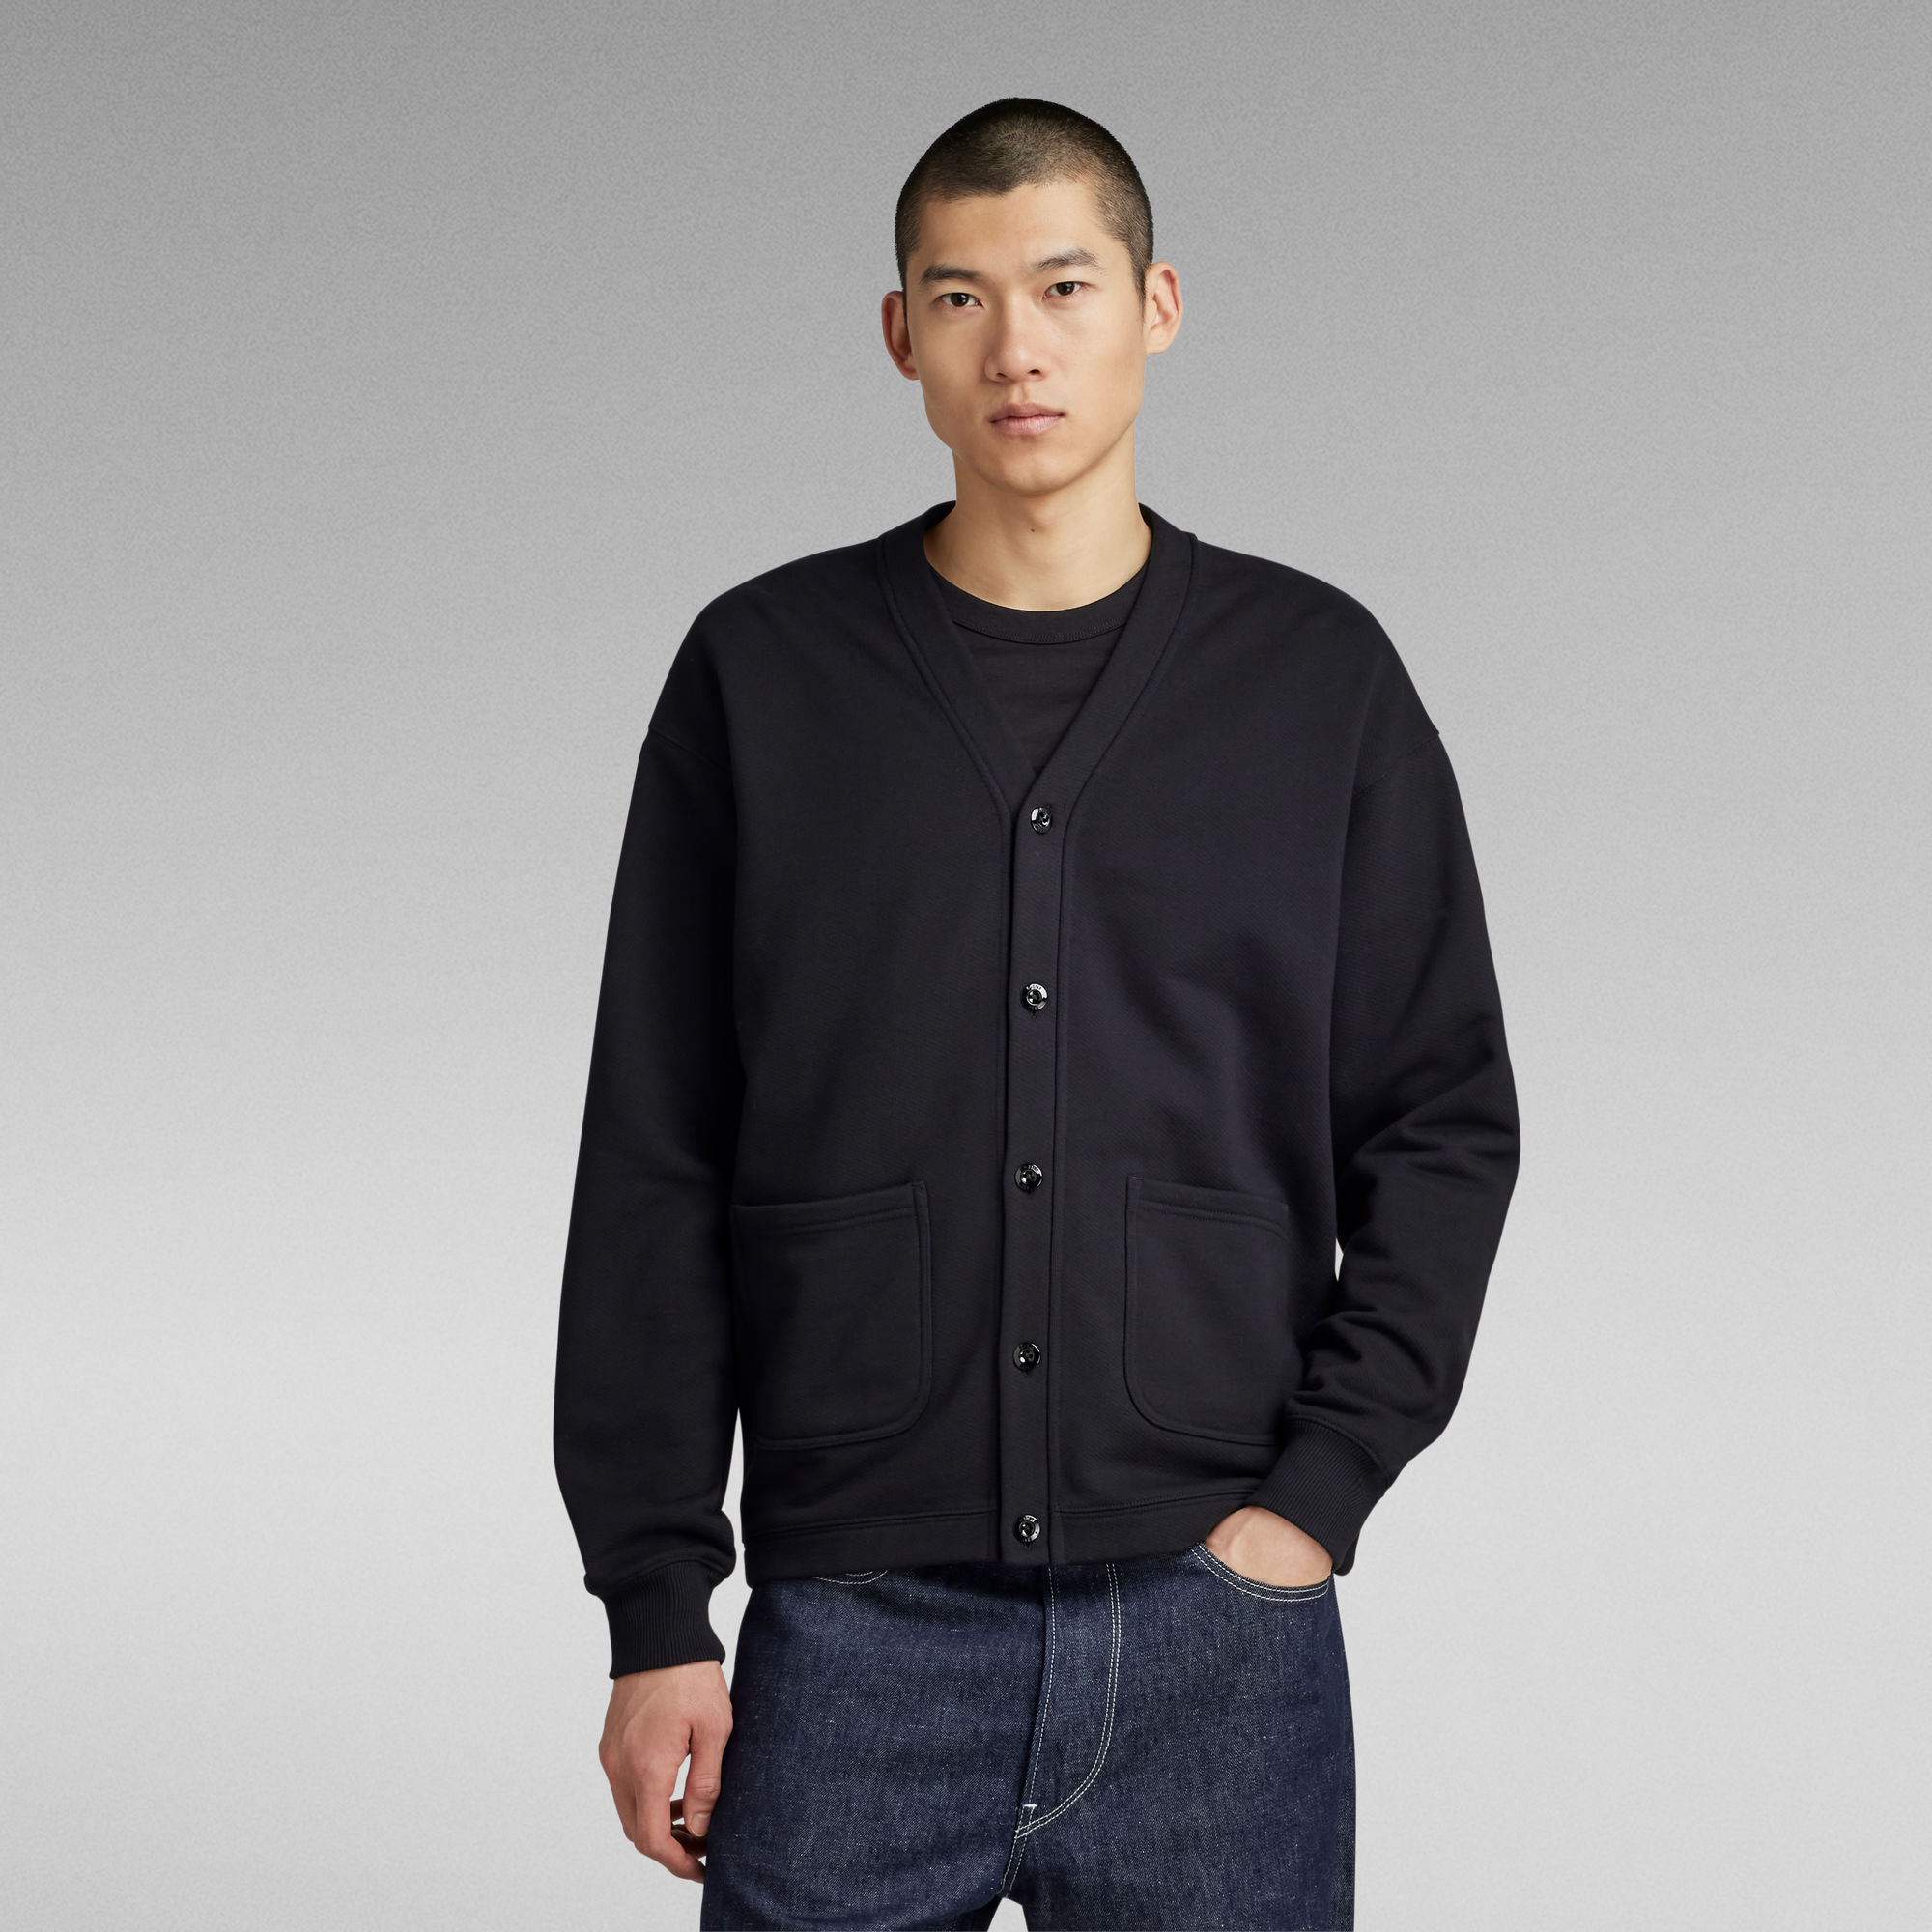 

Essential Relaxed Cardigan Sweater - Black - Men